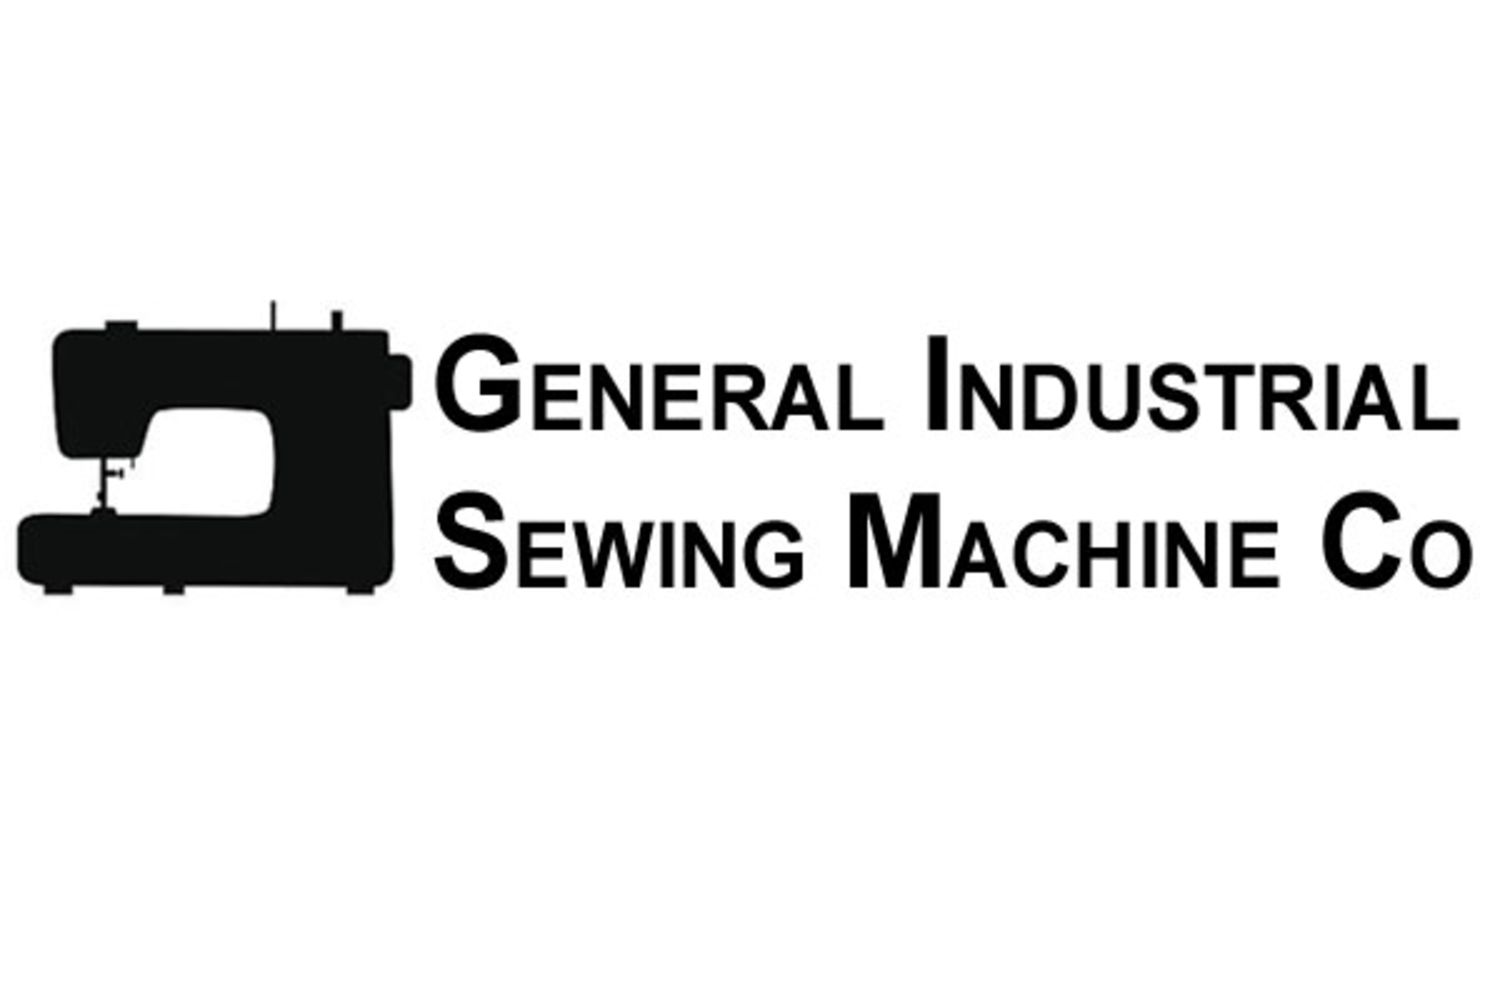 General Industrial Sewing Machine Co